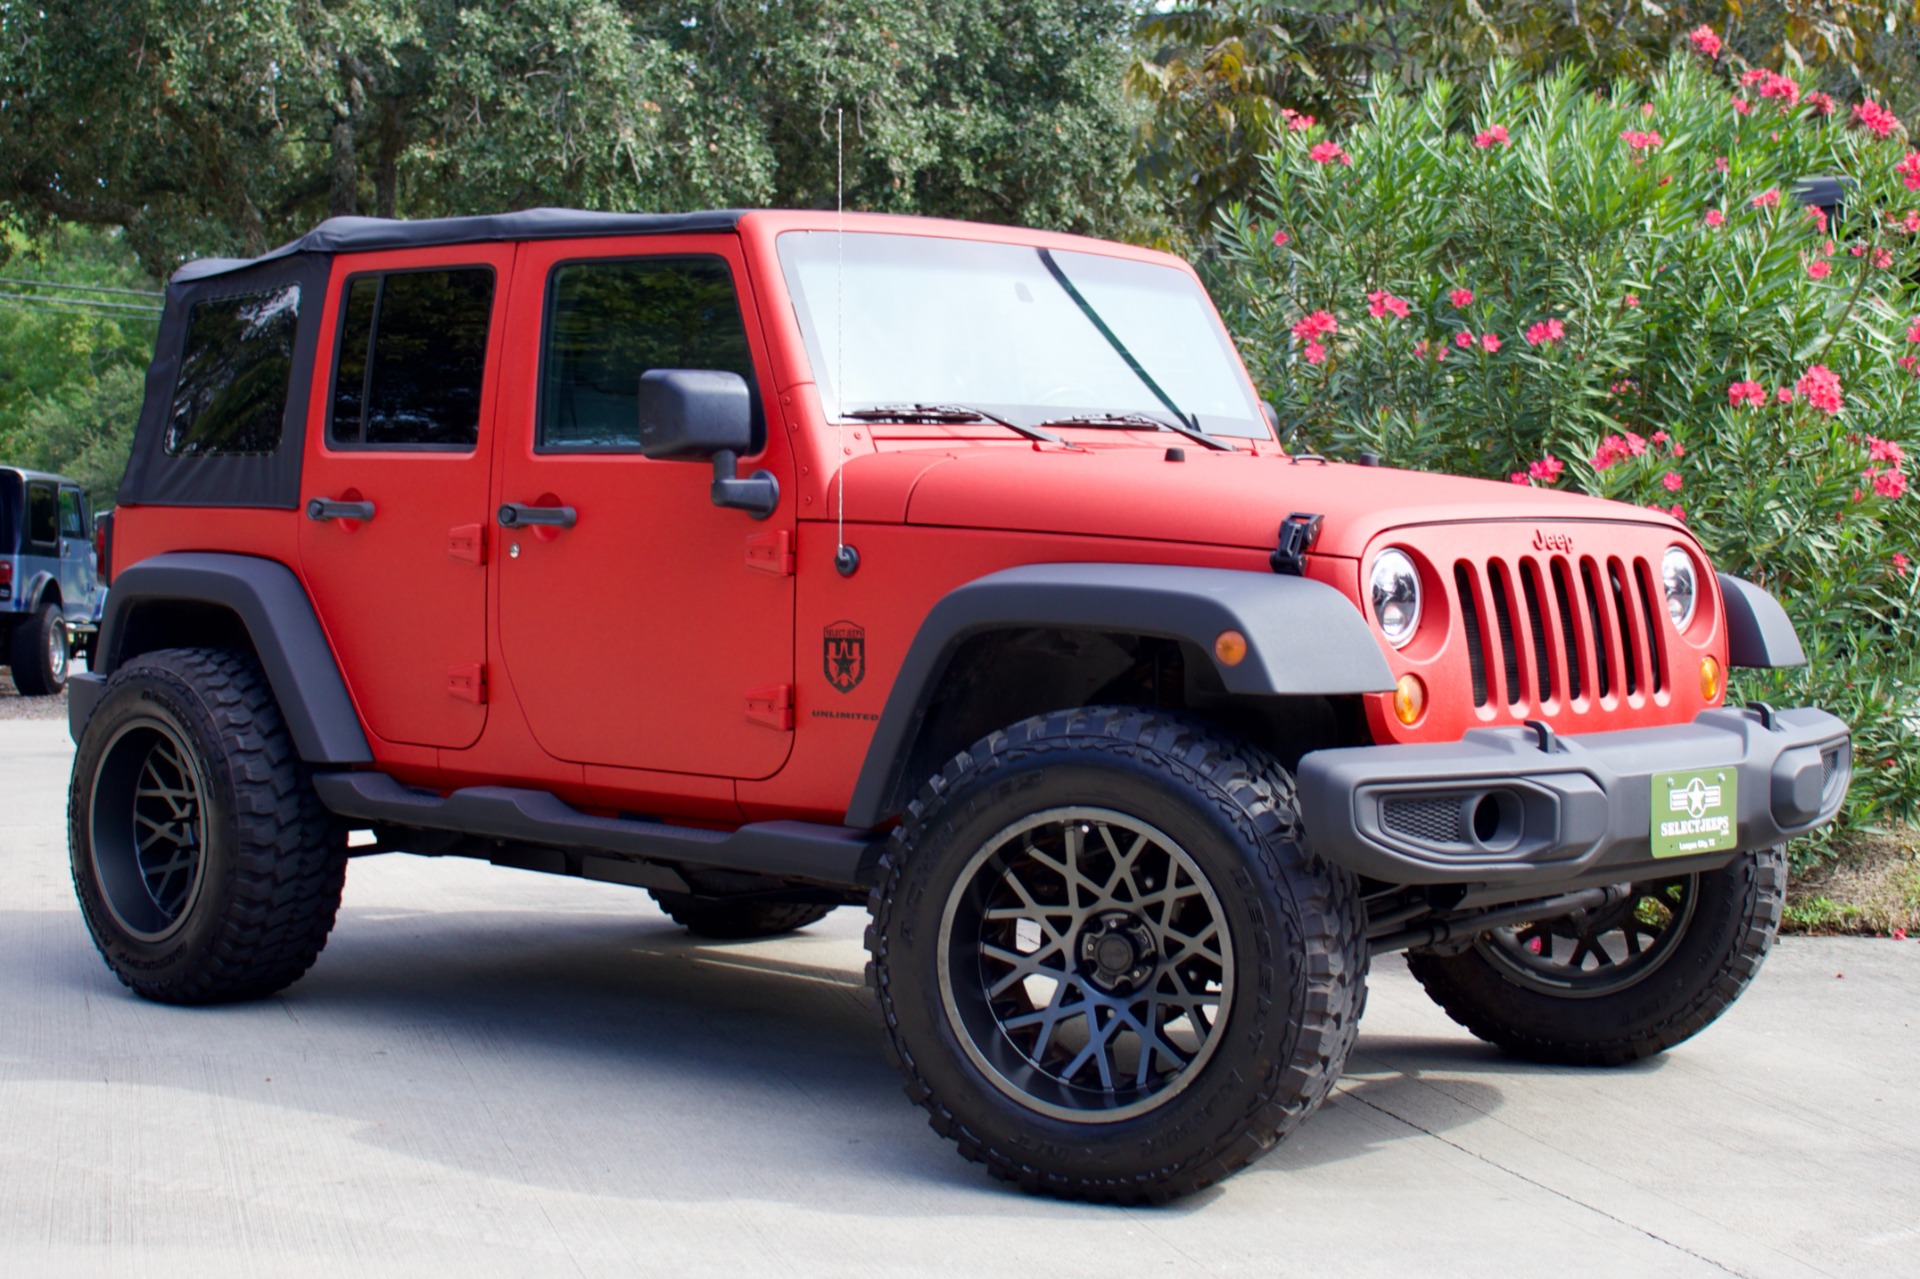 Used 2008 Jeep Wrangler Unlimited X For Sale ($18,995) | Select Jeeps ...